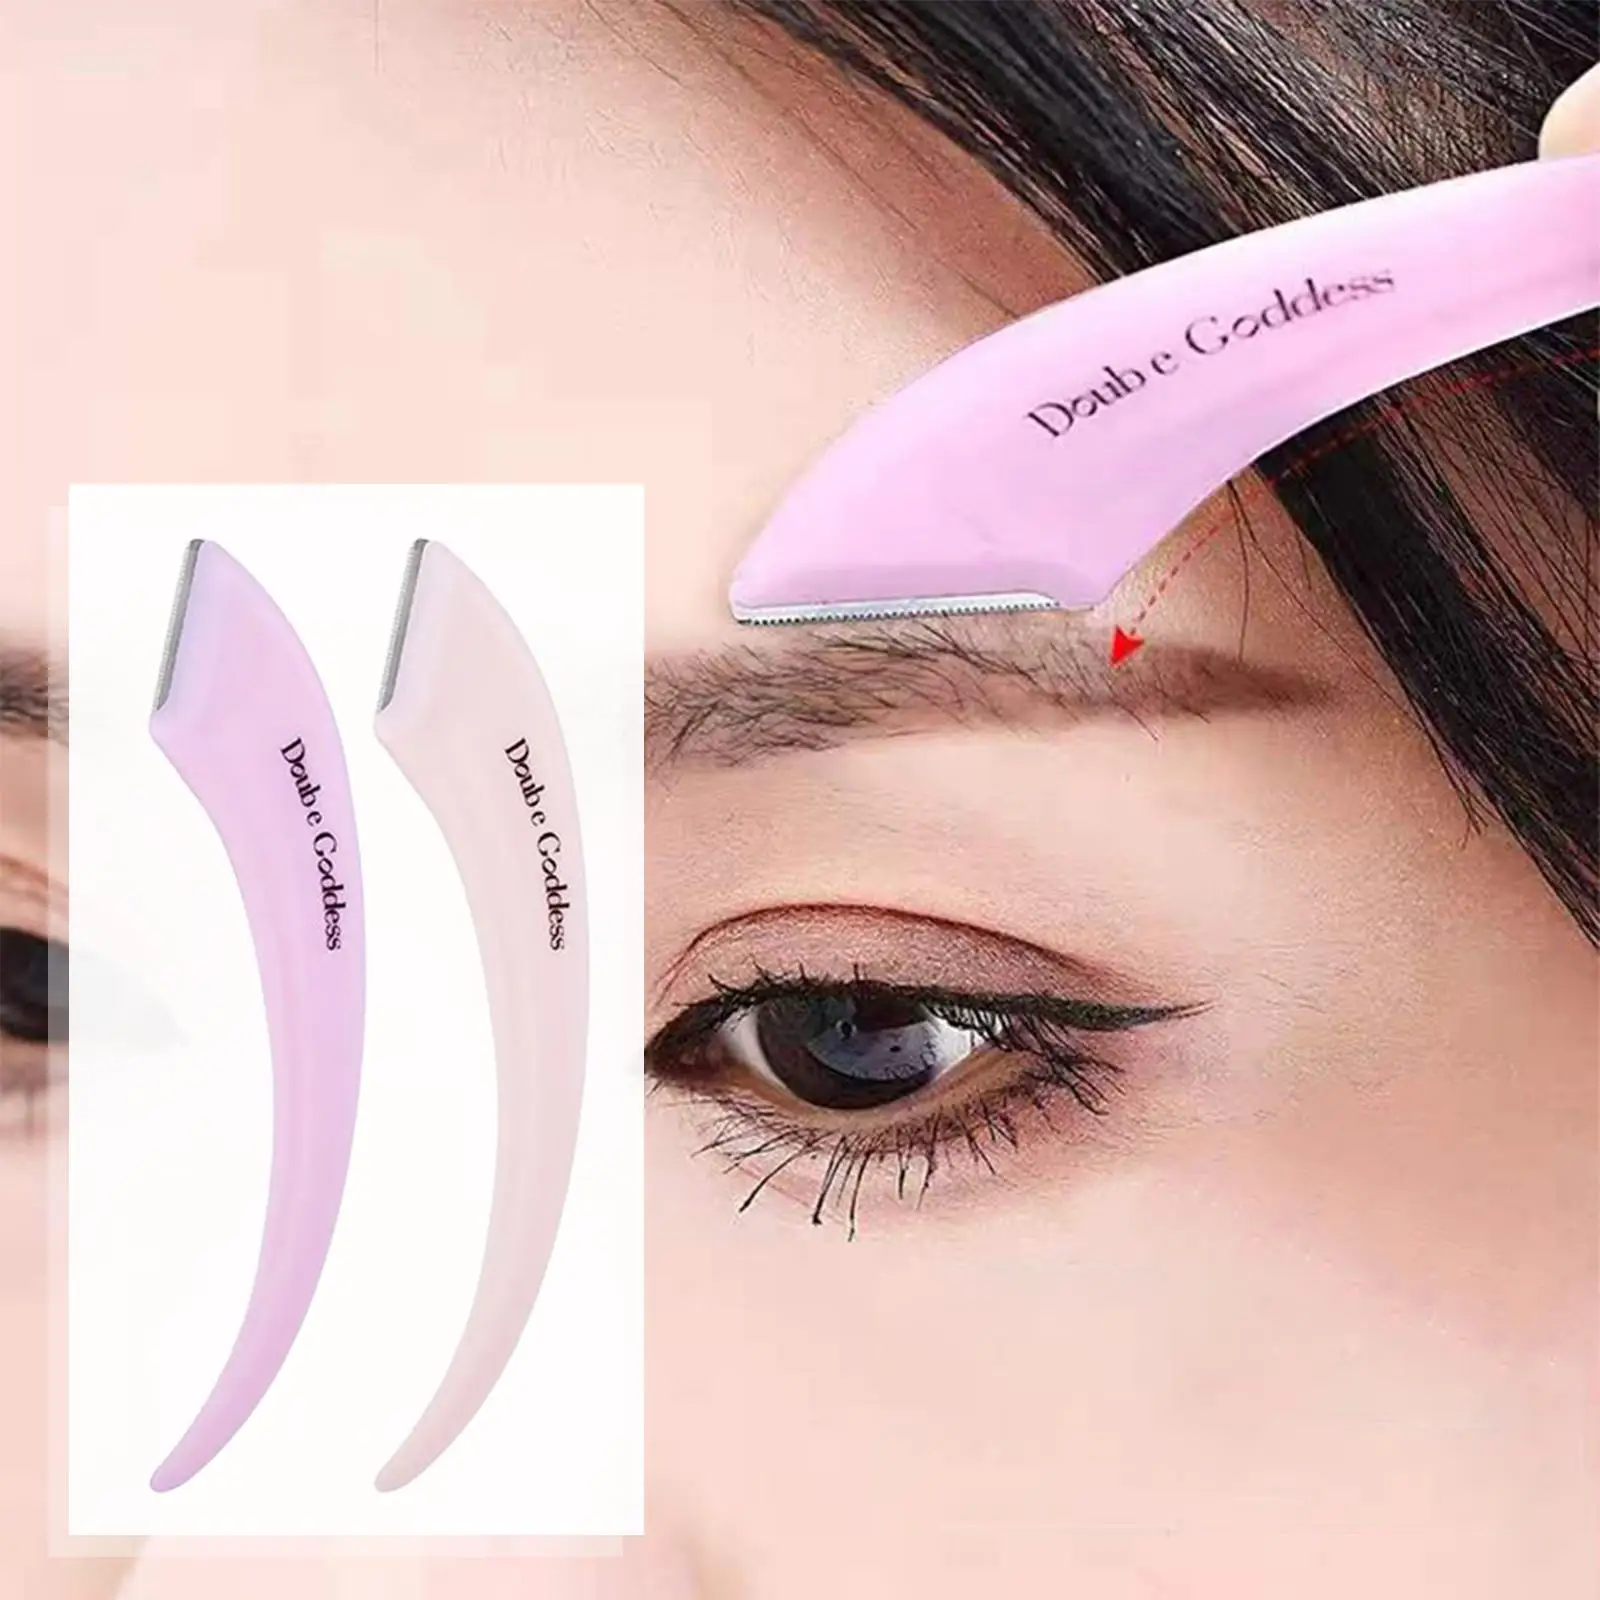 Eyebrow   Stainless Steel  Portable Eyebrow Repair Devices with Cover Eyebrow Trimming Eye Brow  unisex adult